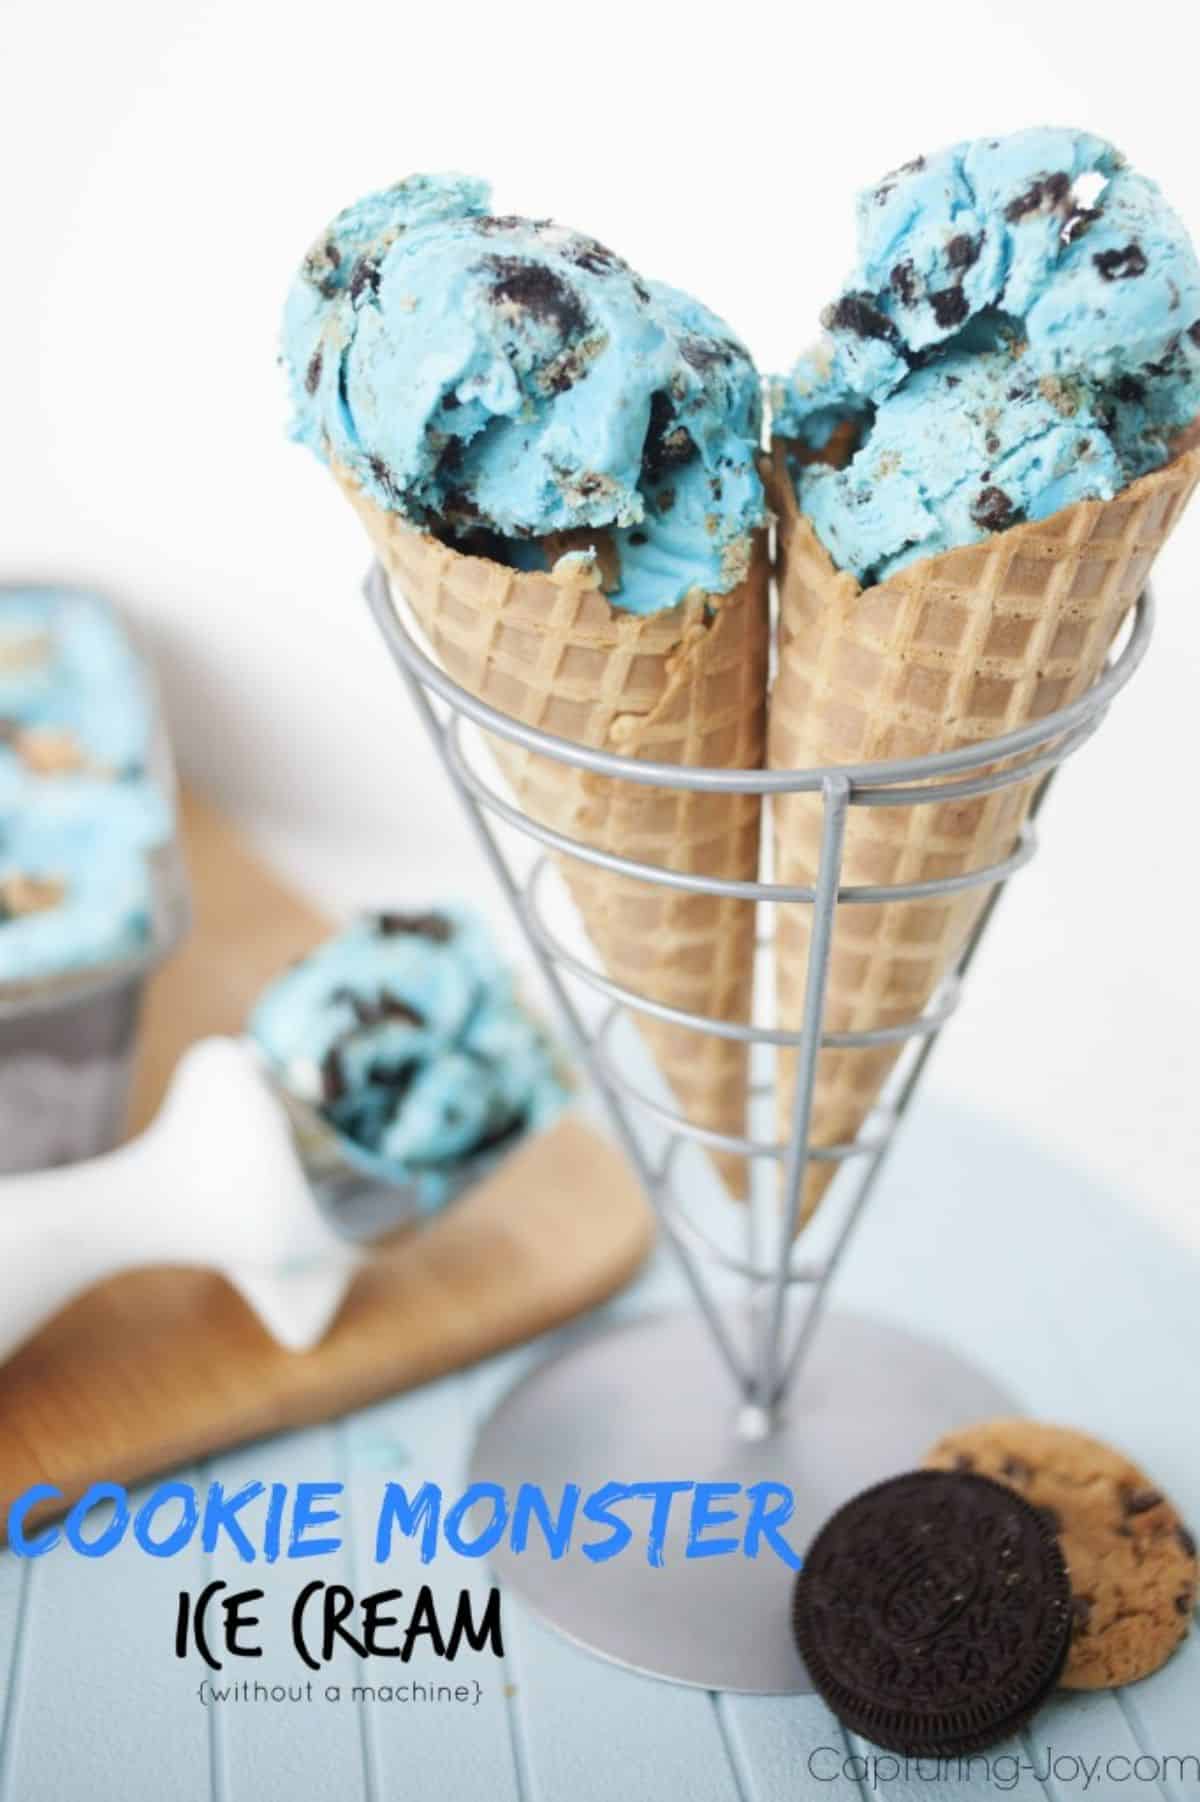 Fresh cookie monster ice cream in an ice cream stand.